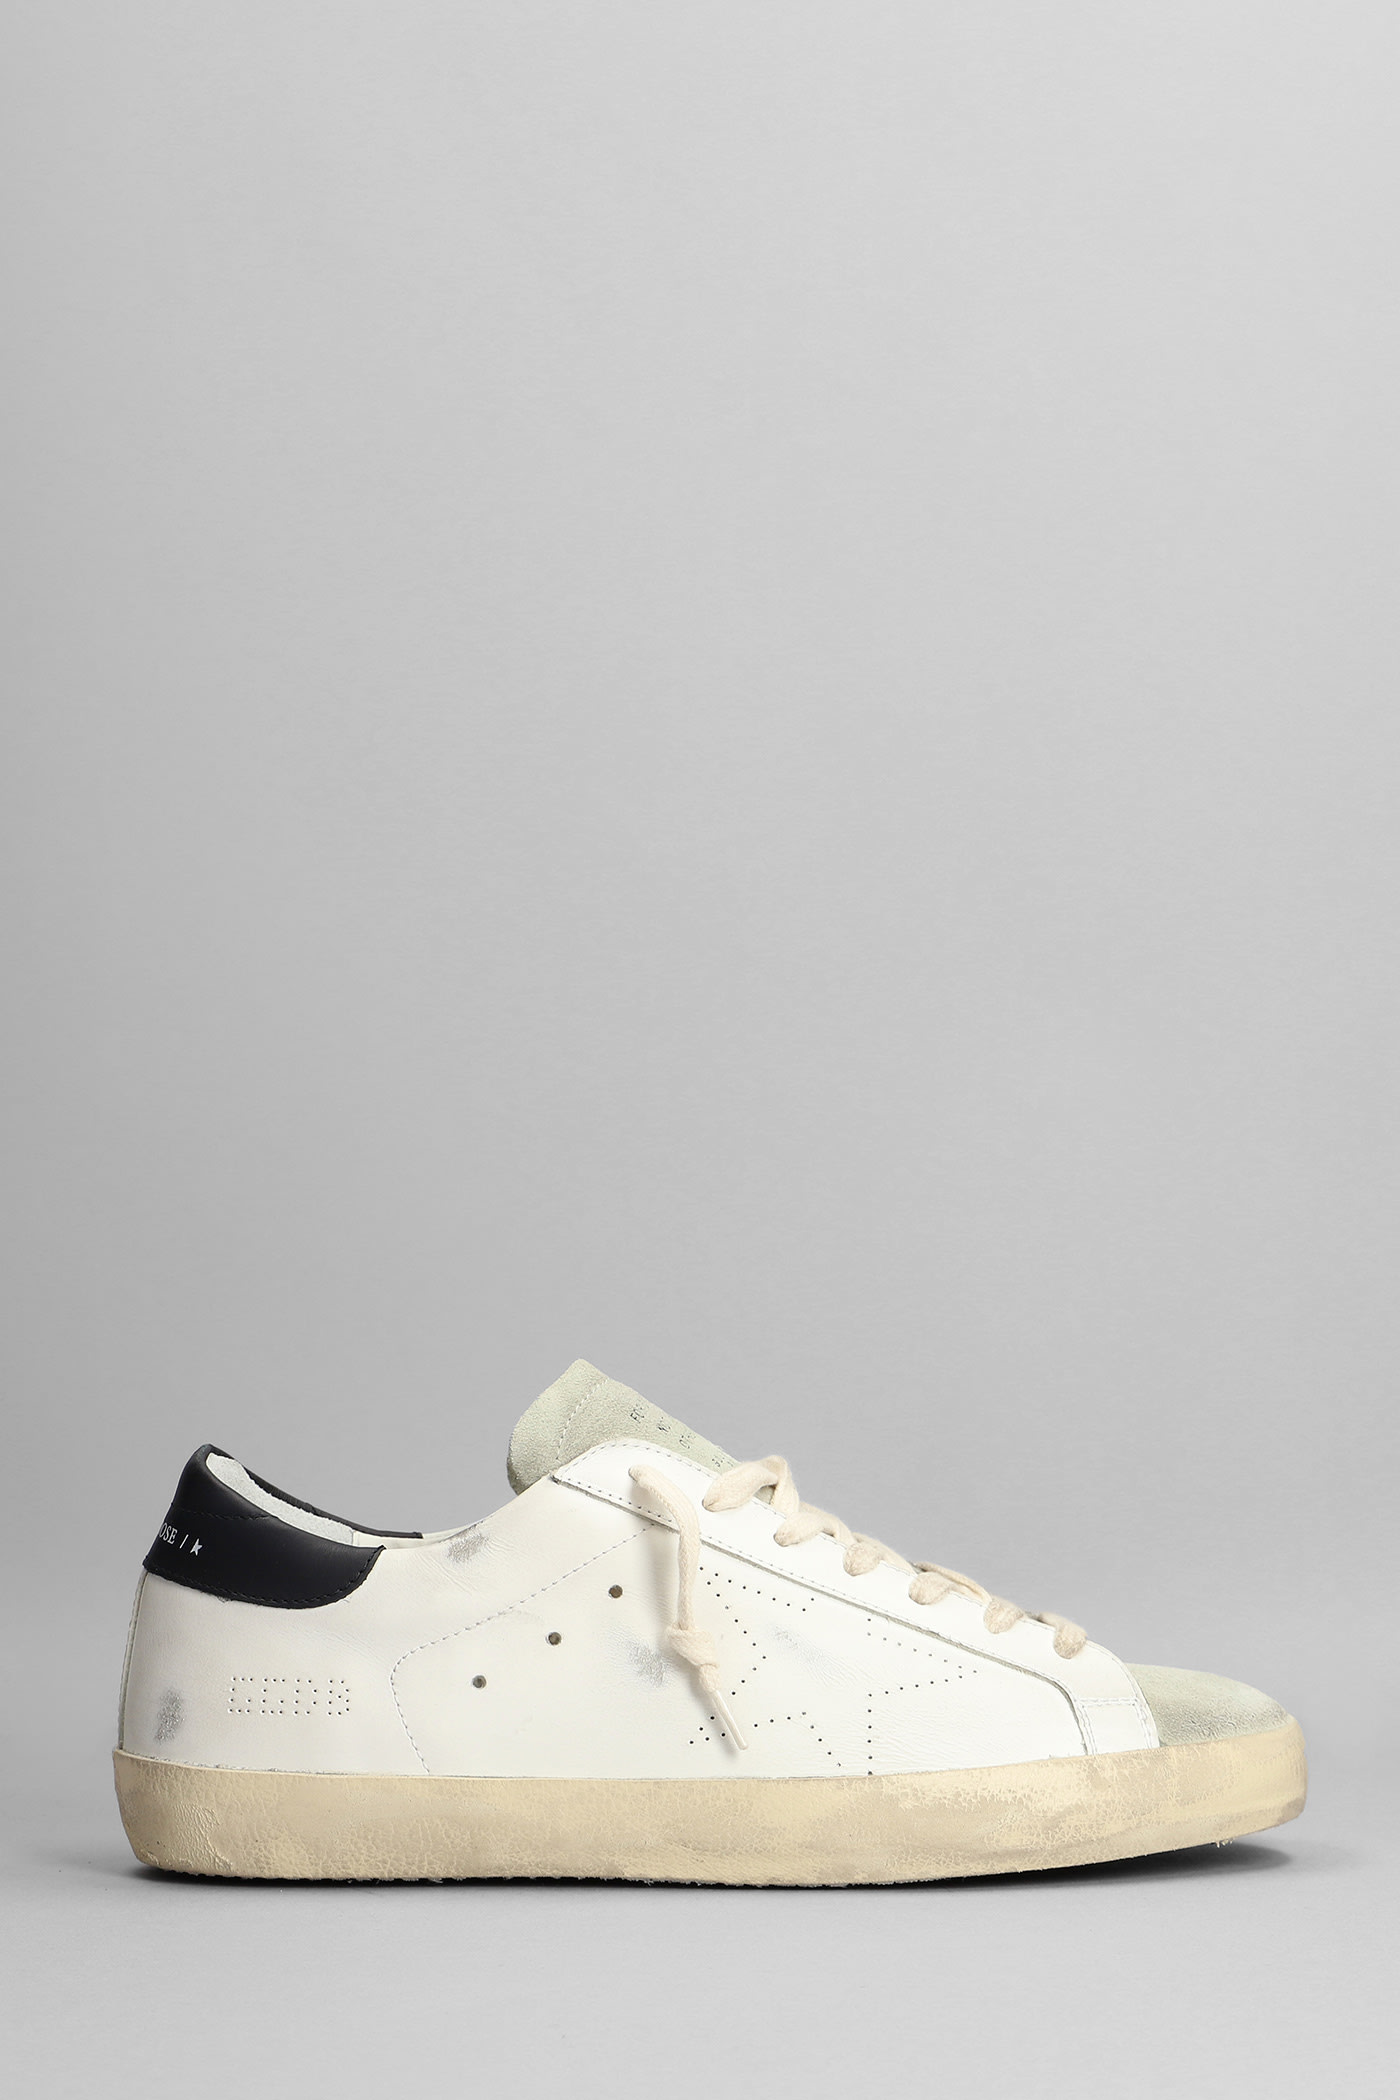 Golden Goose Superstar Skate Sneakers In White Suede And Leather